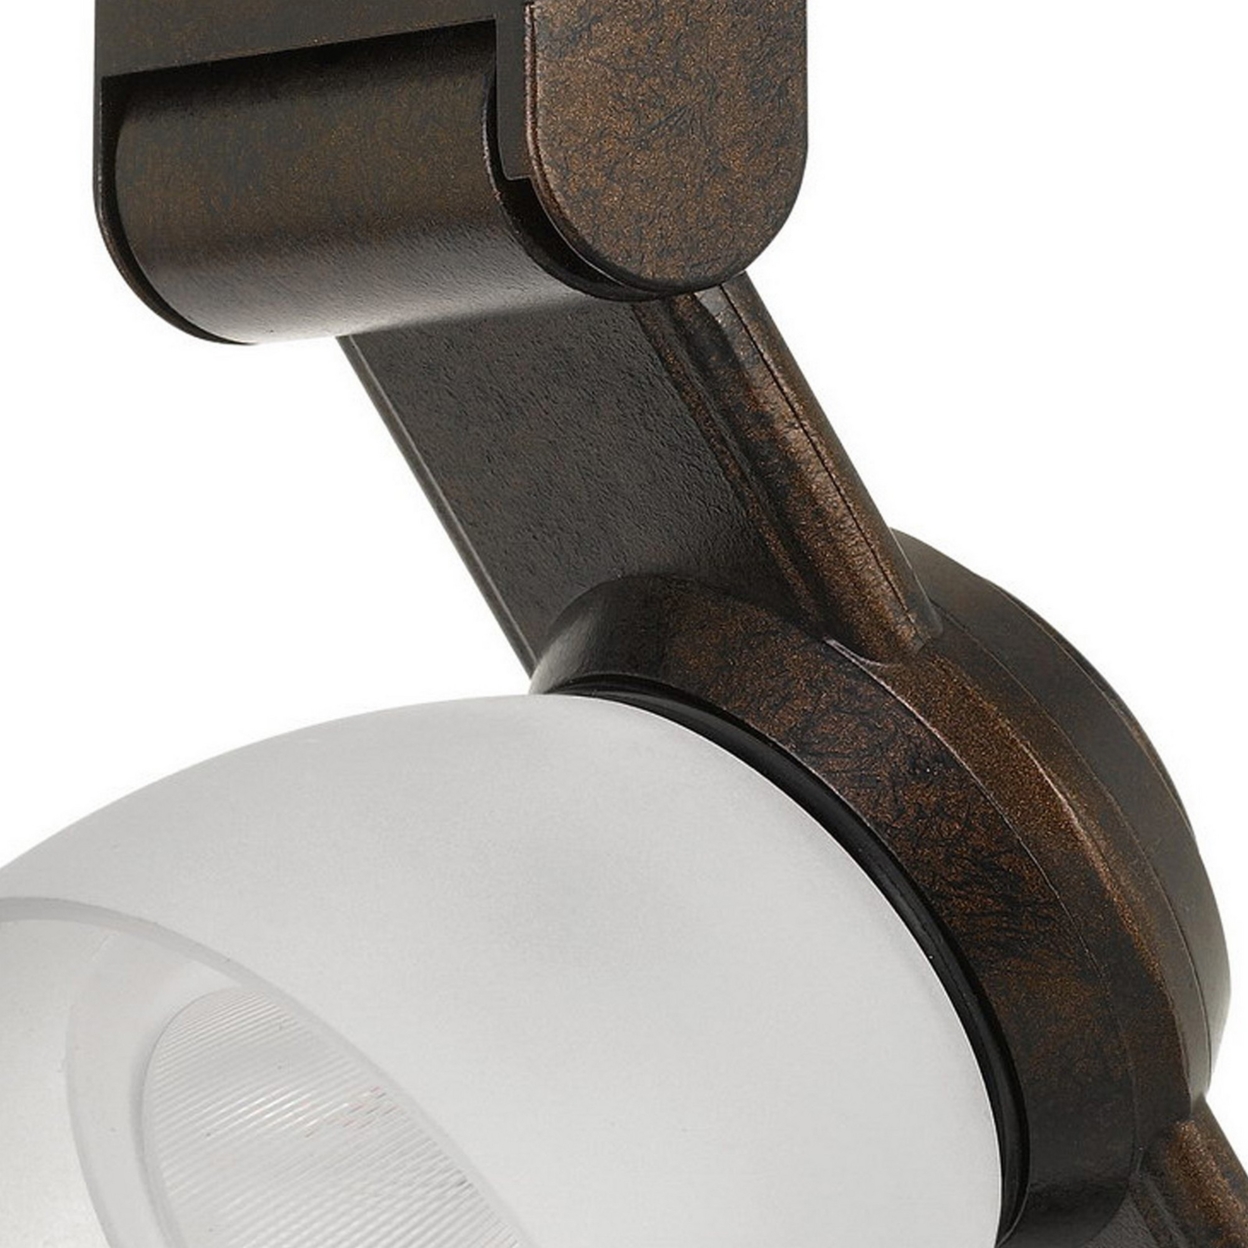 12W Integrated LED Track Fixture With Polycarbonate Head, Bronze And White- Saltoro Sherpi